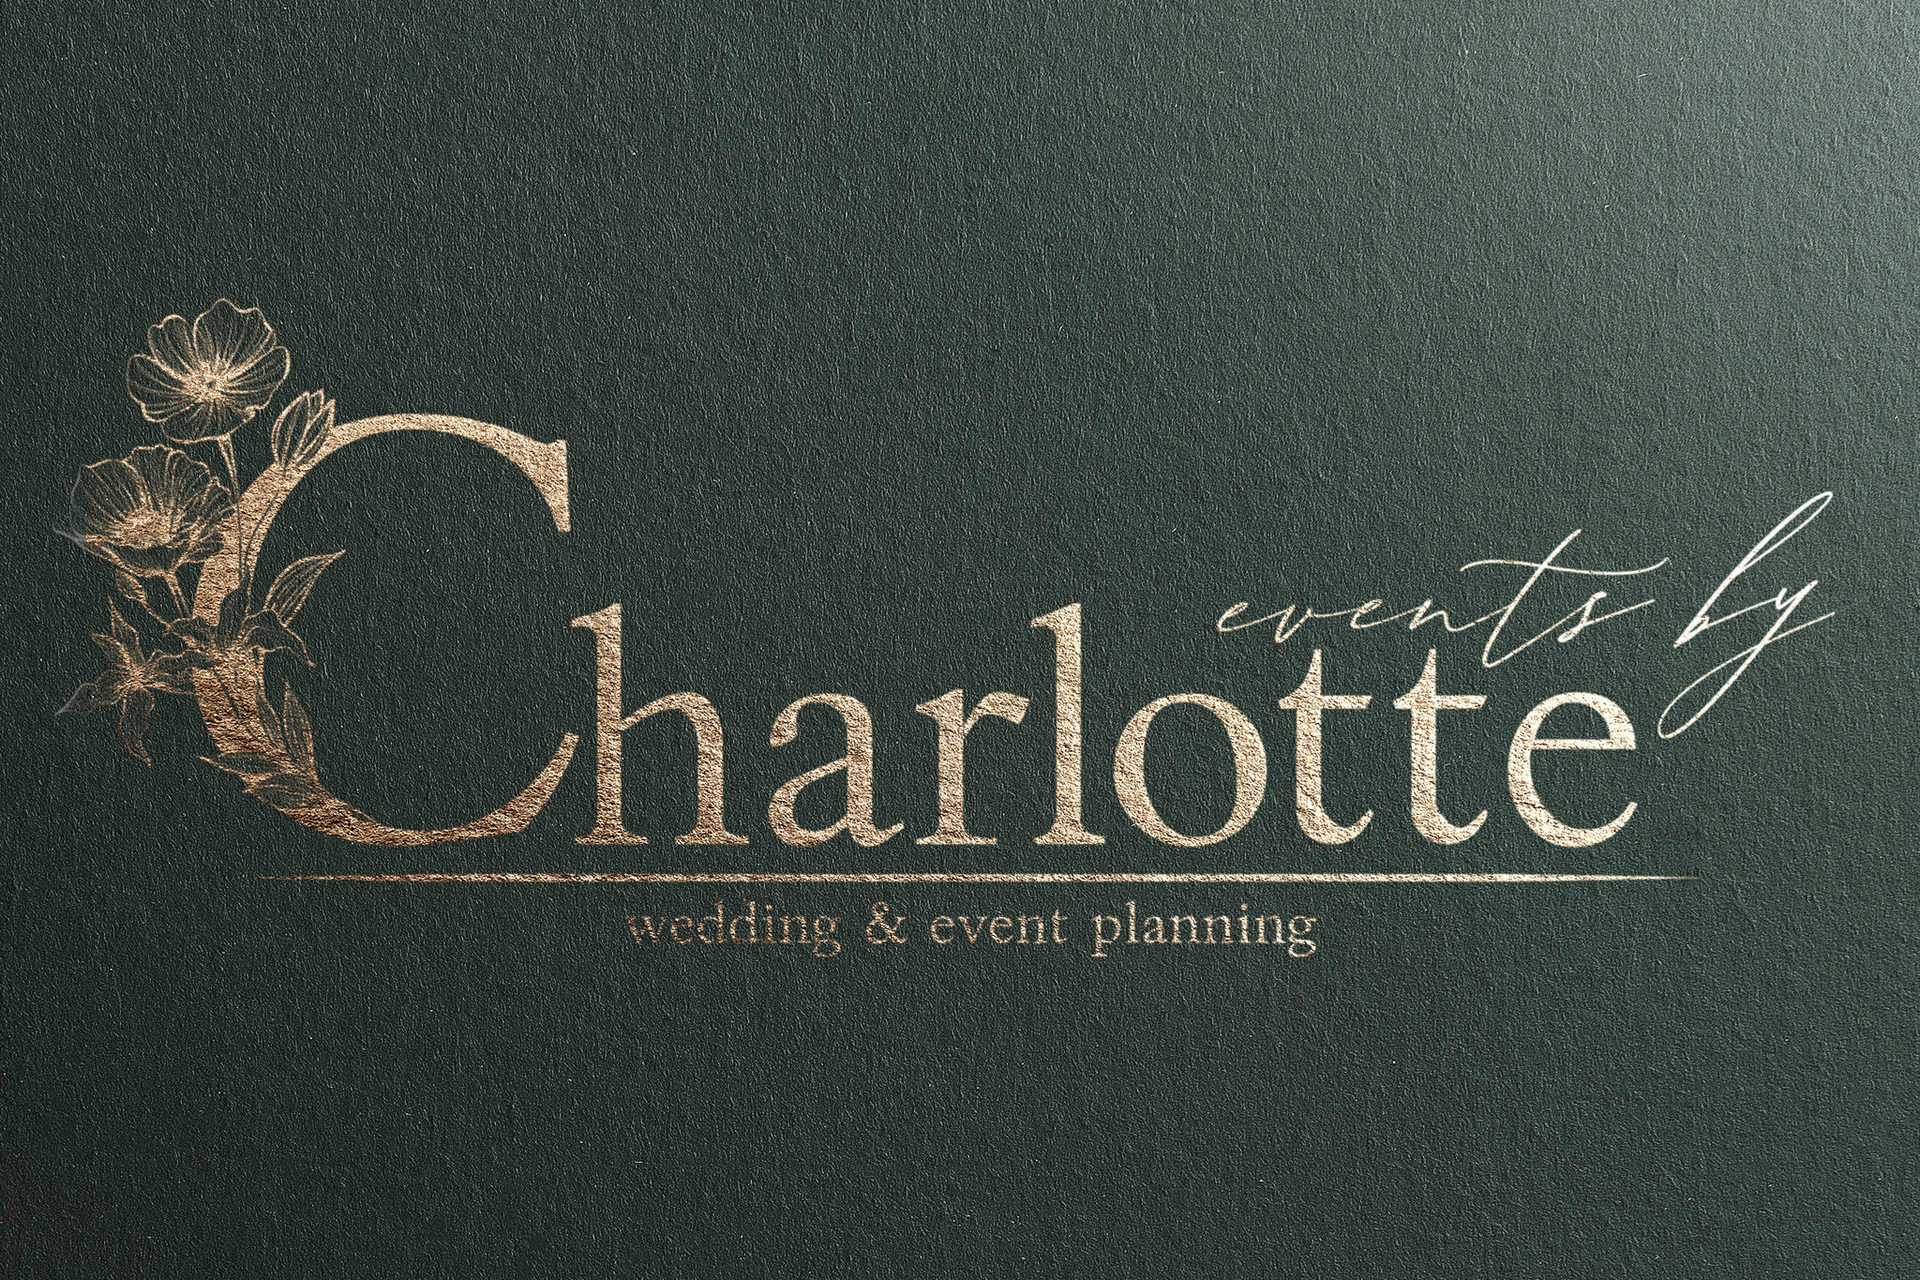 Events by charlotte logo printed